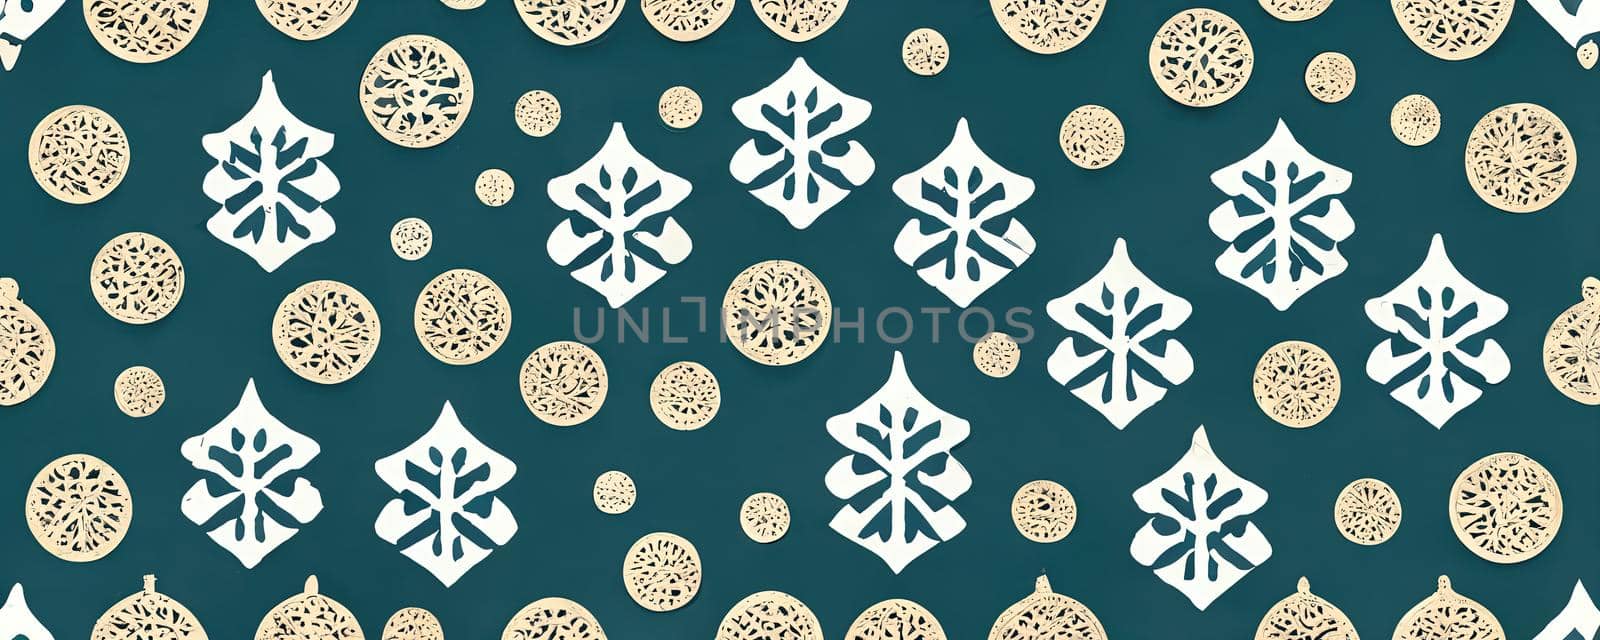 abstract texture on the New Year theme of white snowflakes on what on a turquoise background.